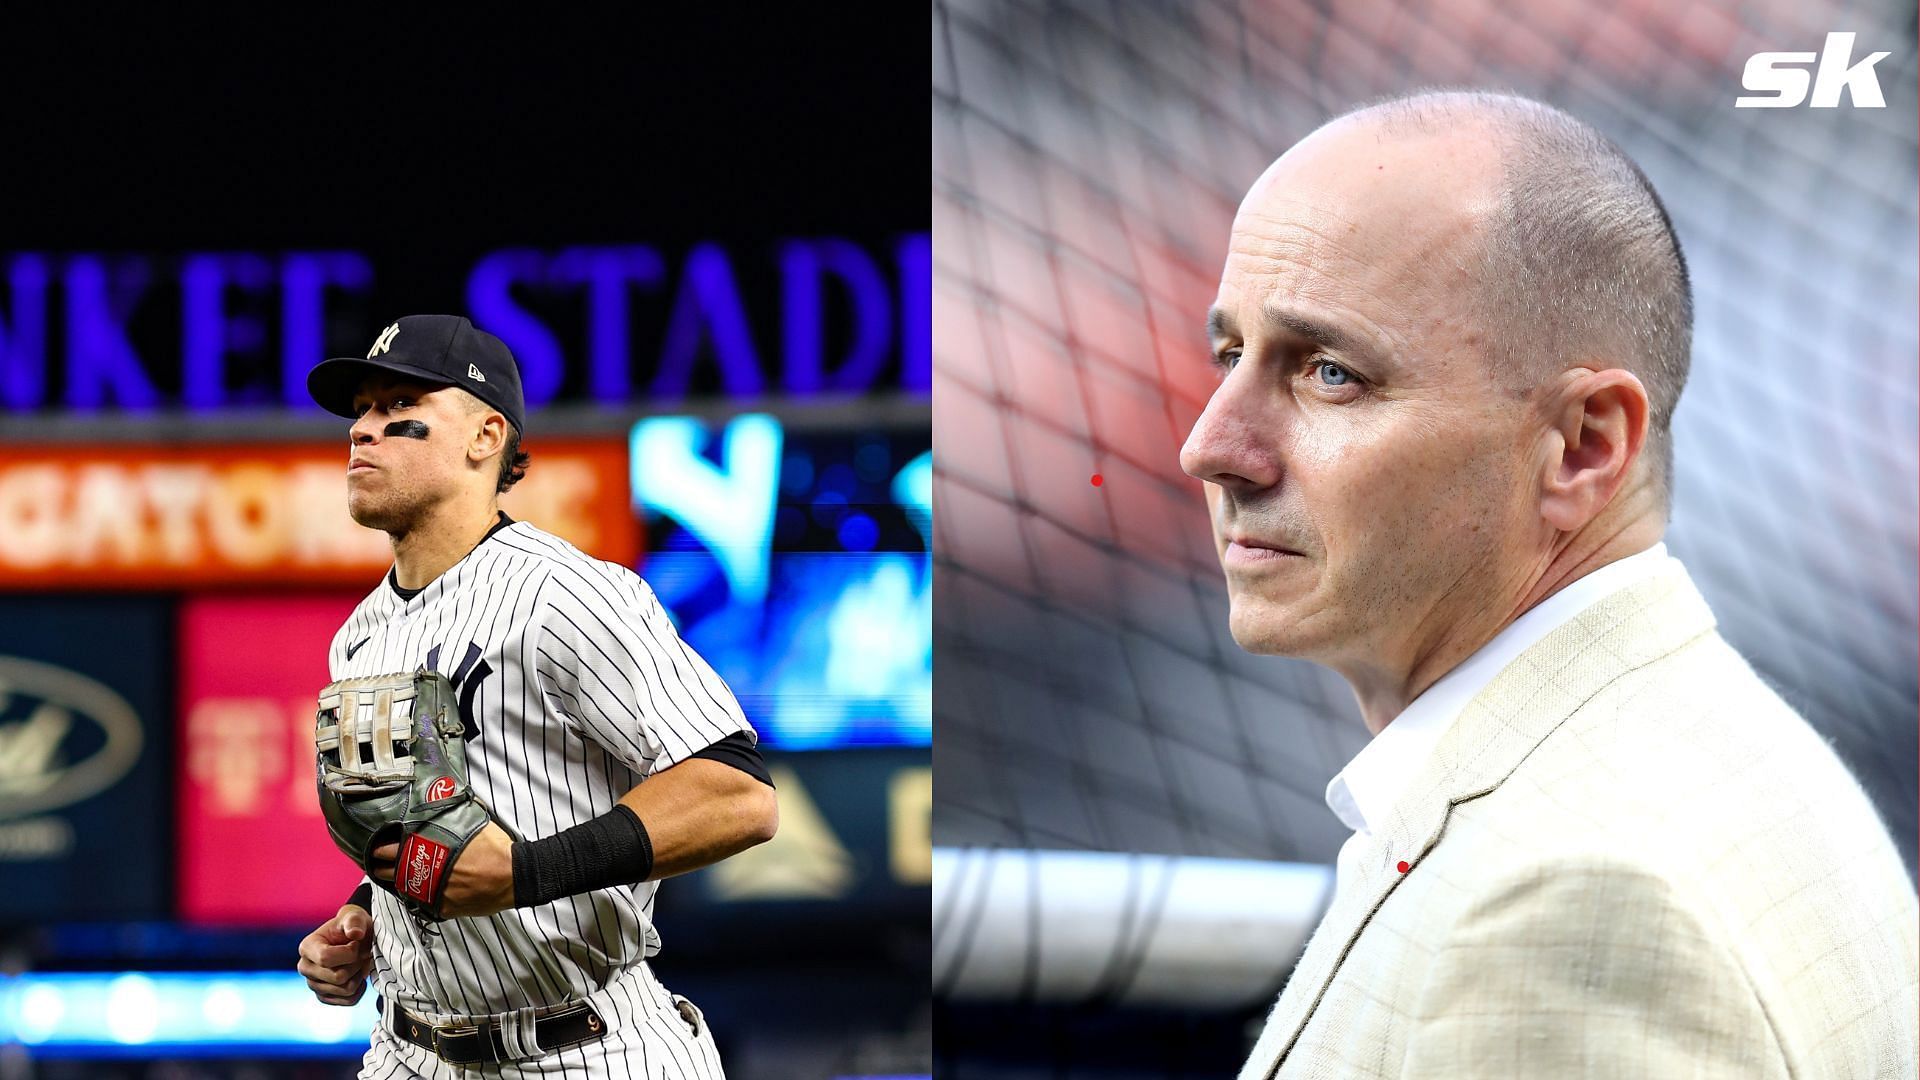 Yankees GM Brian Cashman has embittered fans for suggesting that Aaron Judge could move to center field